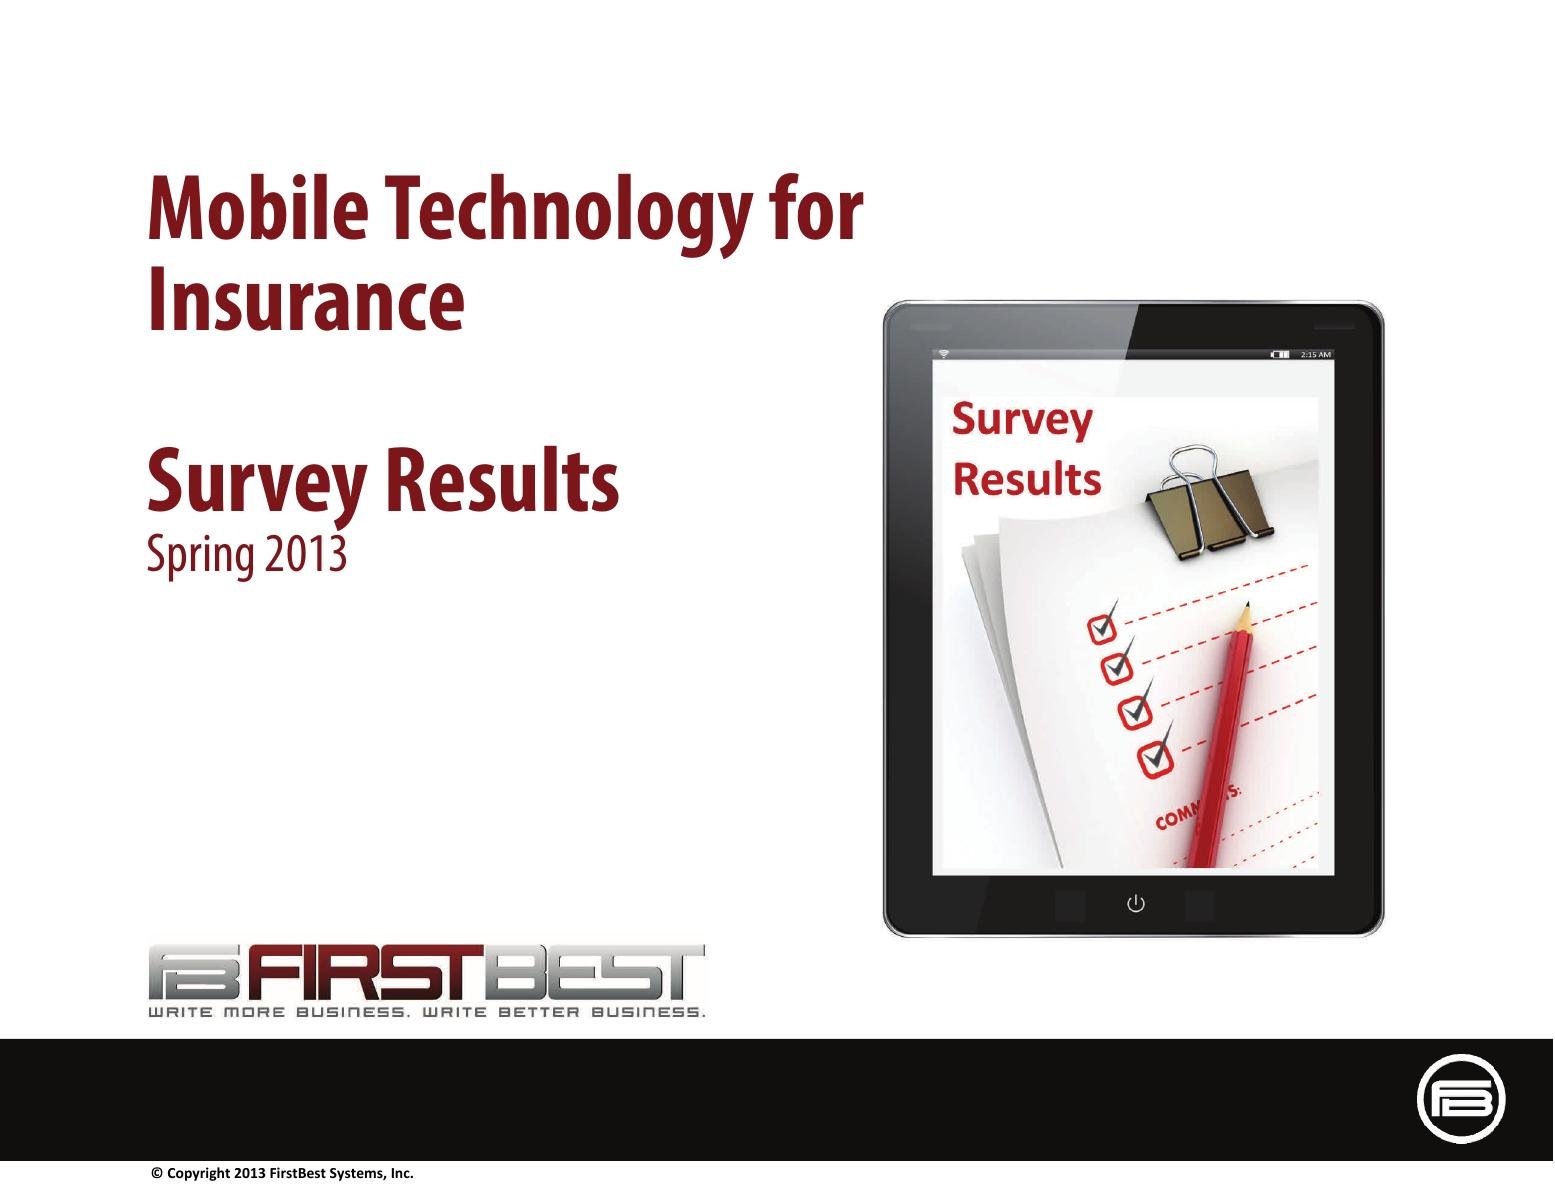 Mobile Technology for Insurance - Survey Results